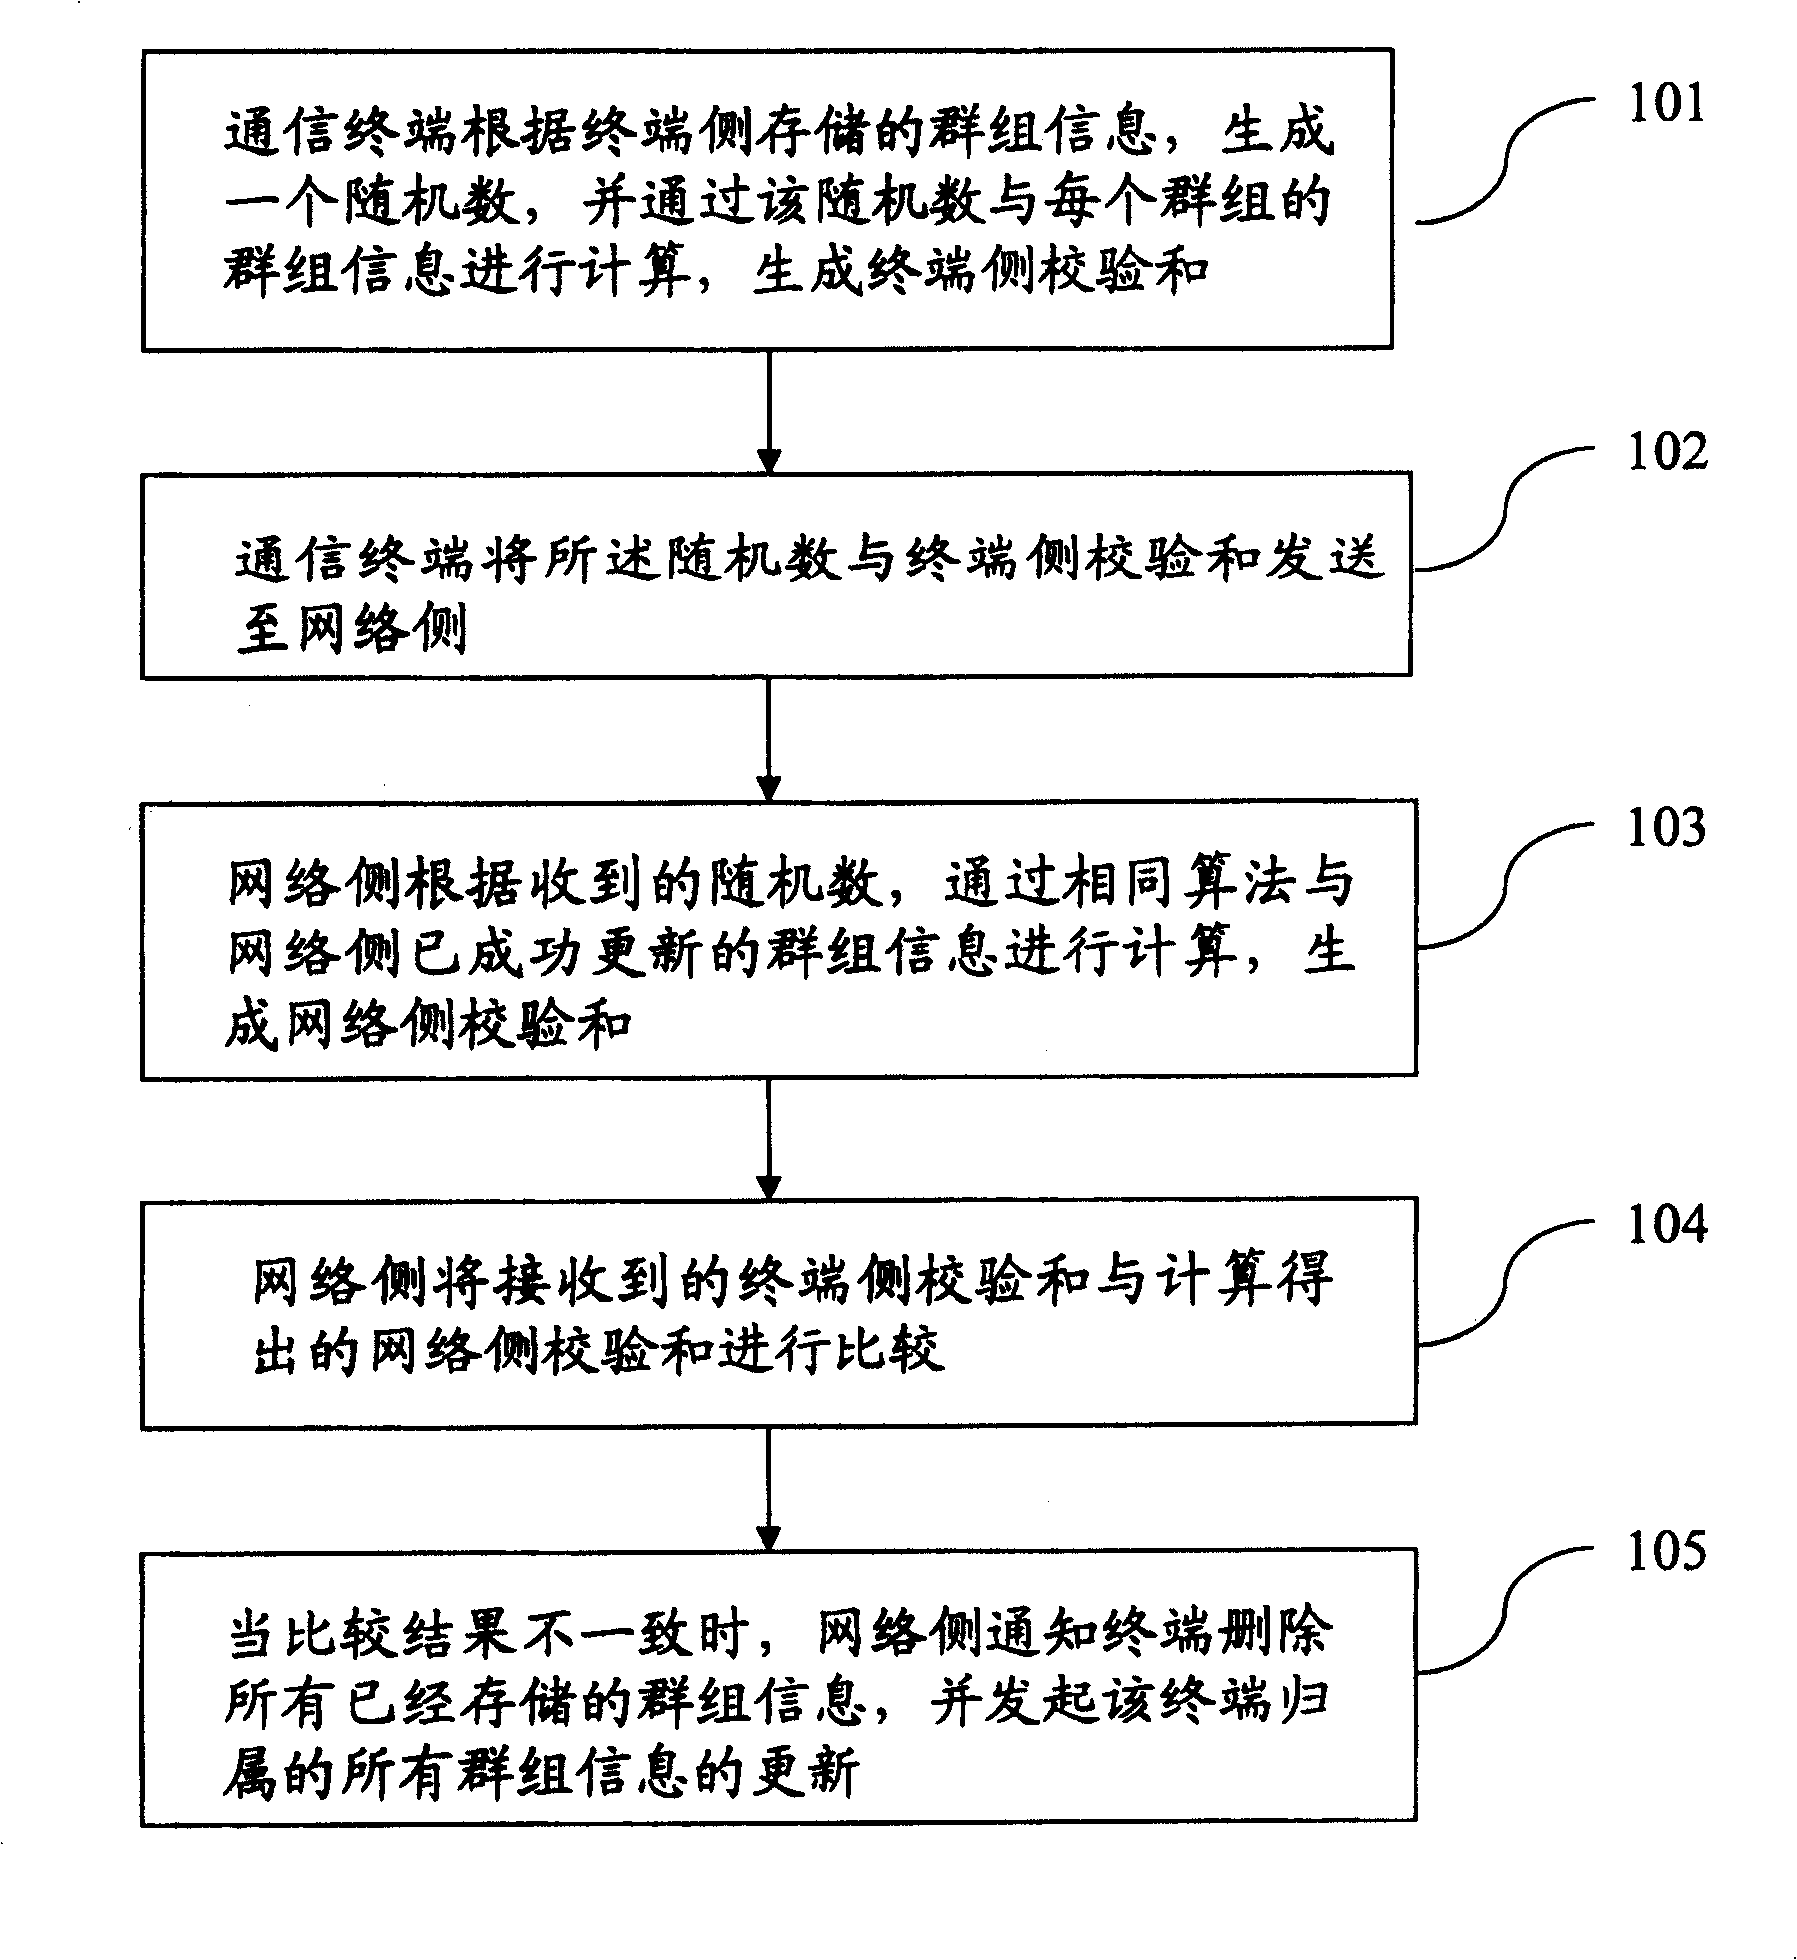 Method for keeping information synchronizntion of group between terminal side and network side in group communication system